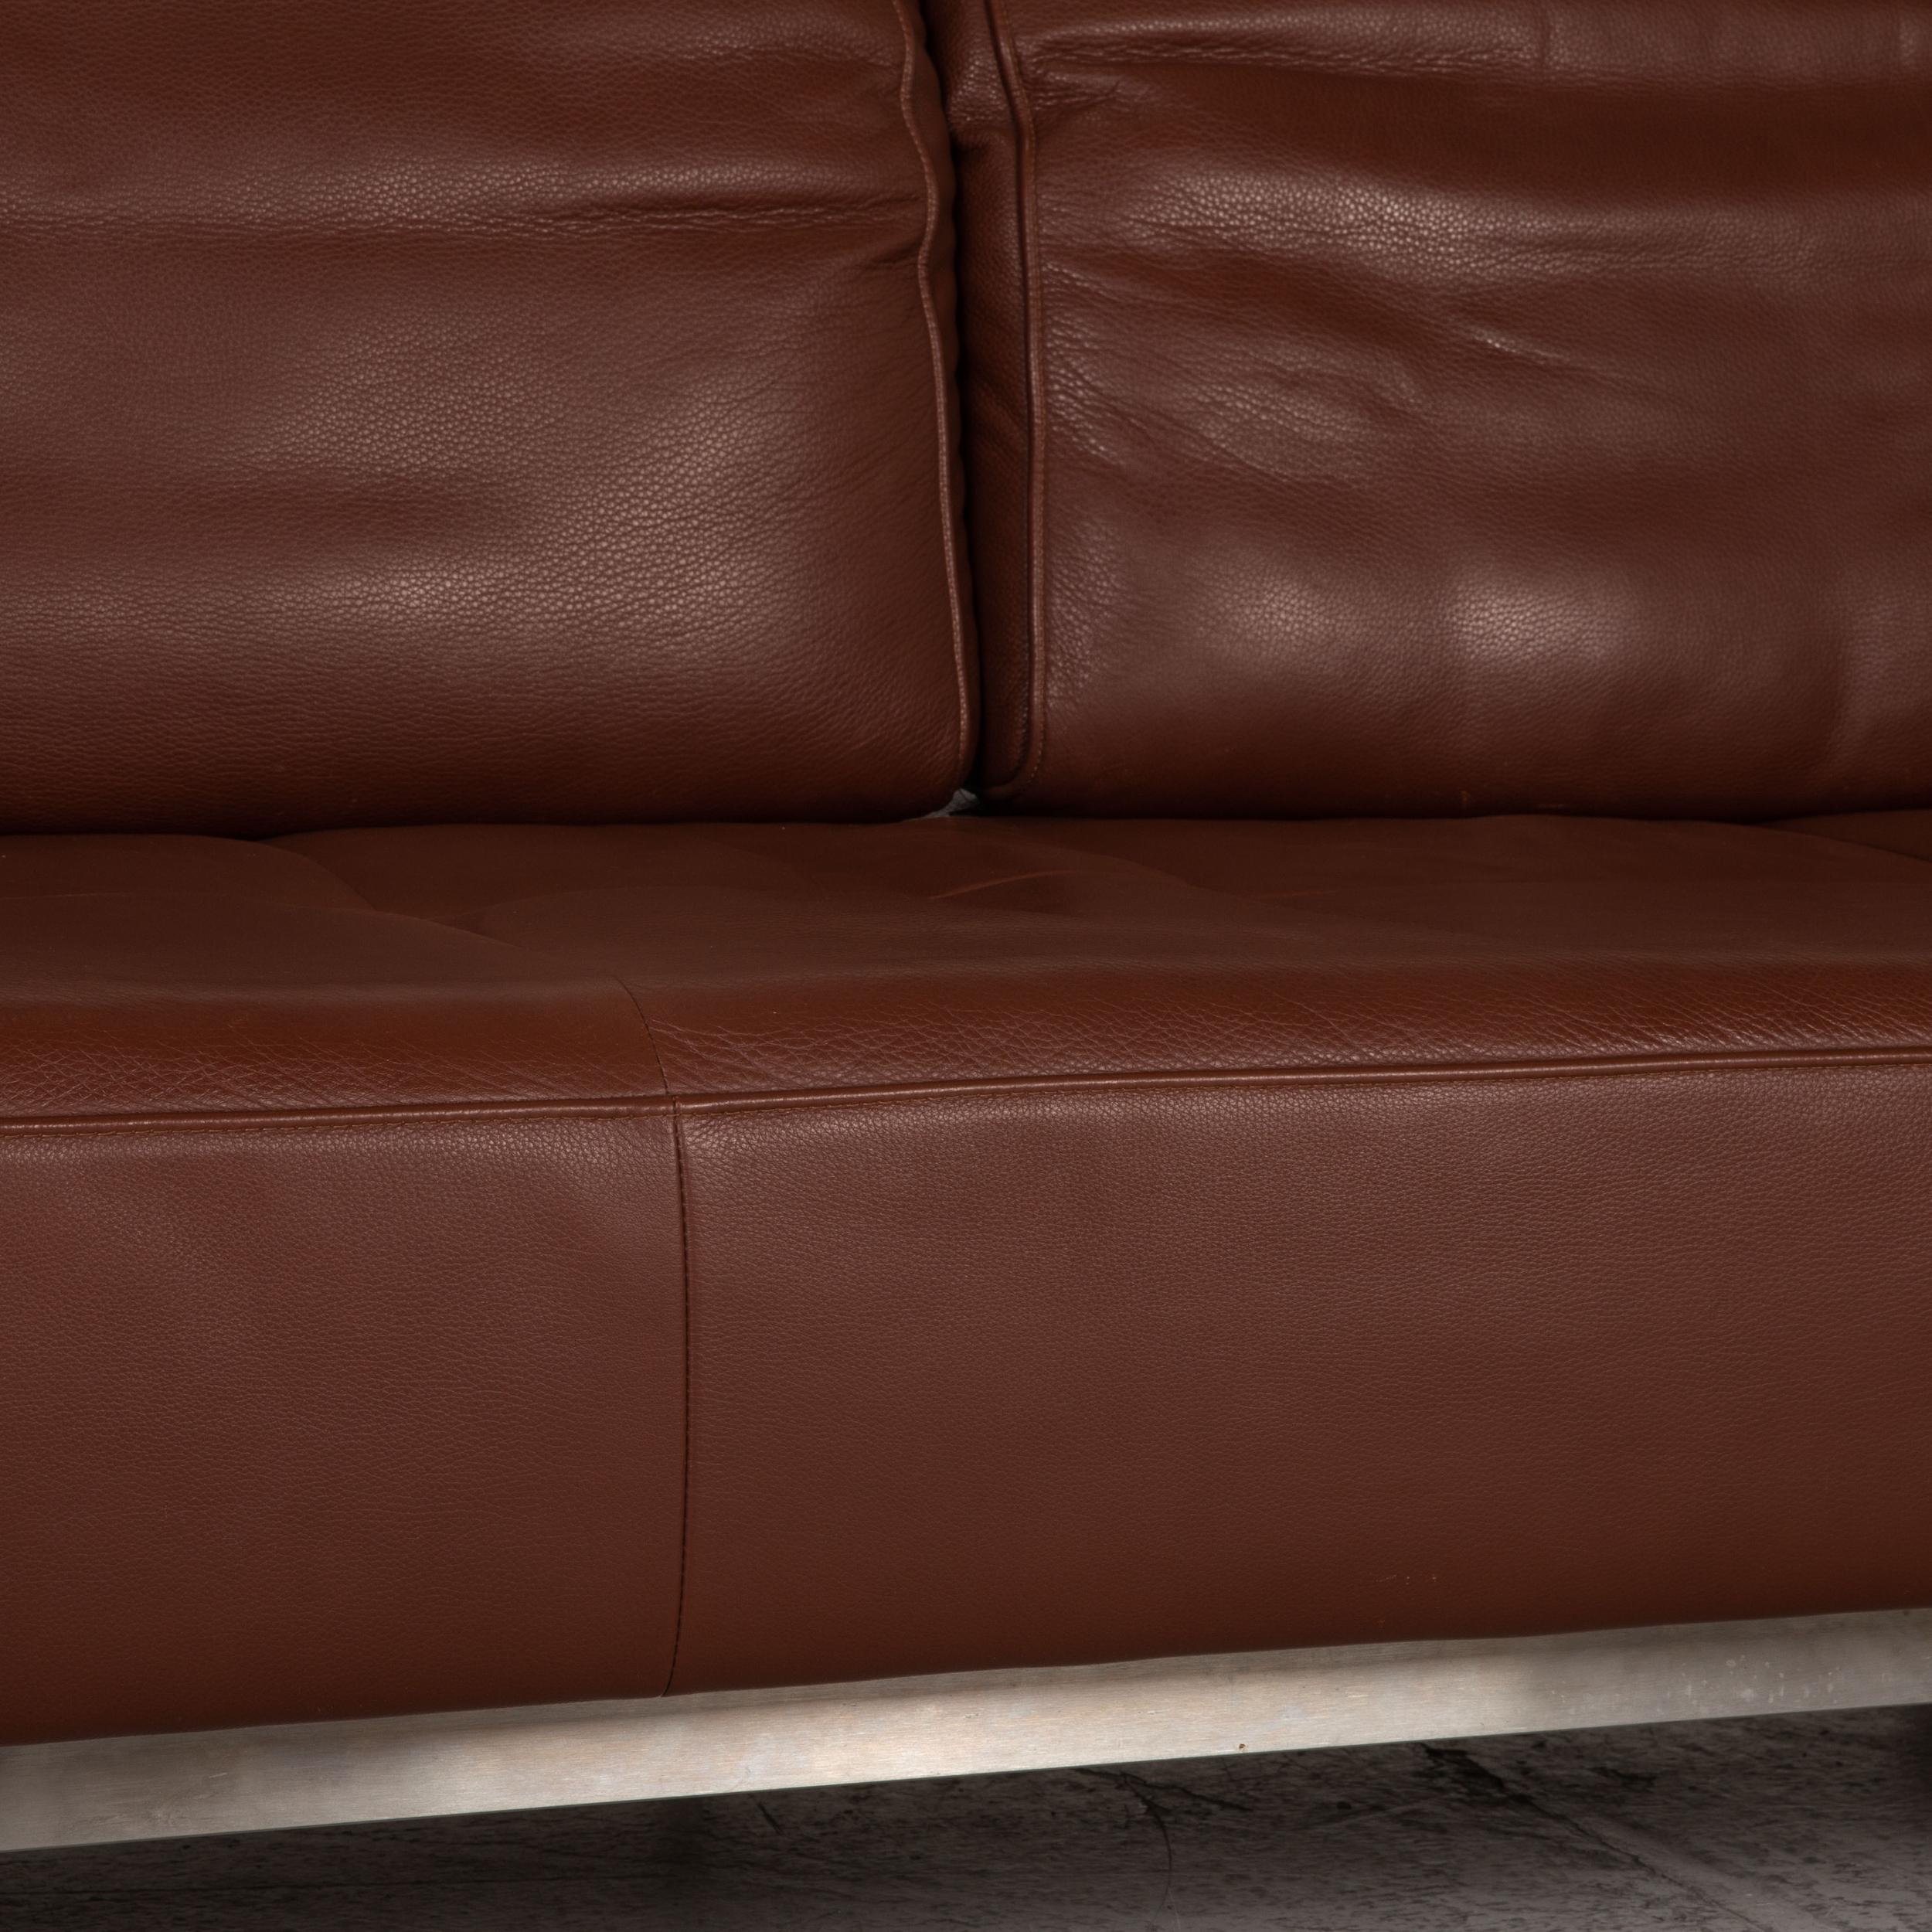 German Rolf Benz Dono Leather Sofa Brown Three-Seater Couch Function For Sale